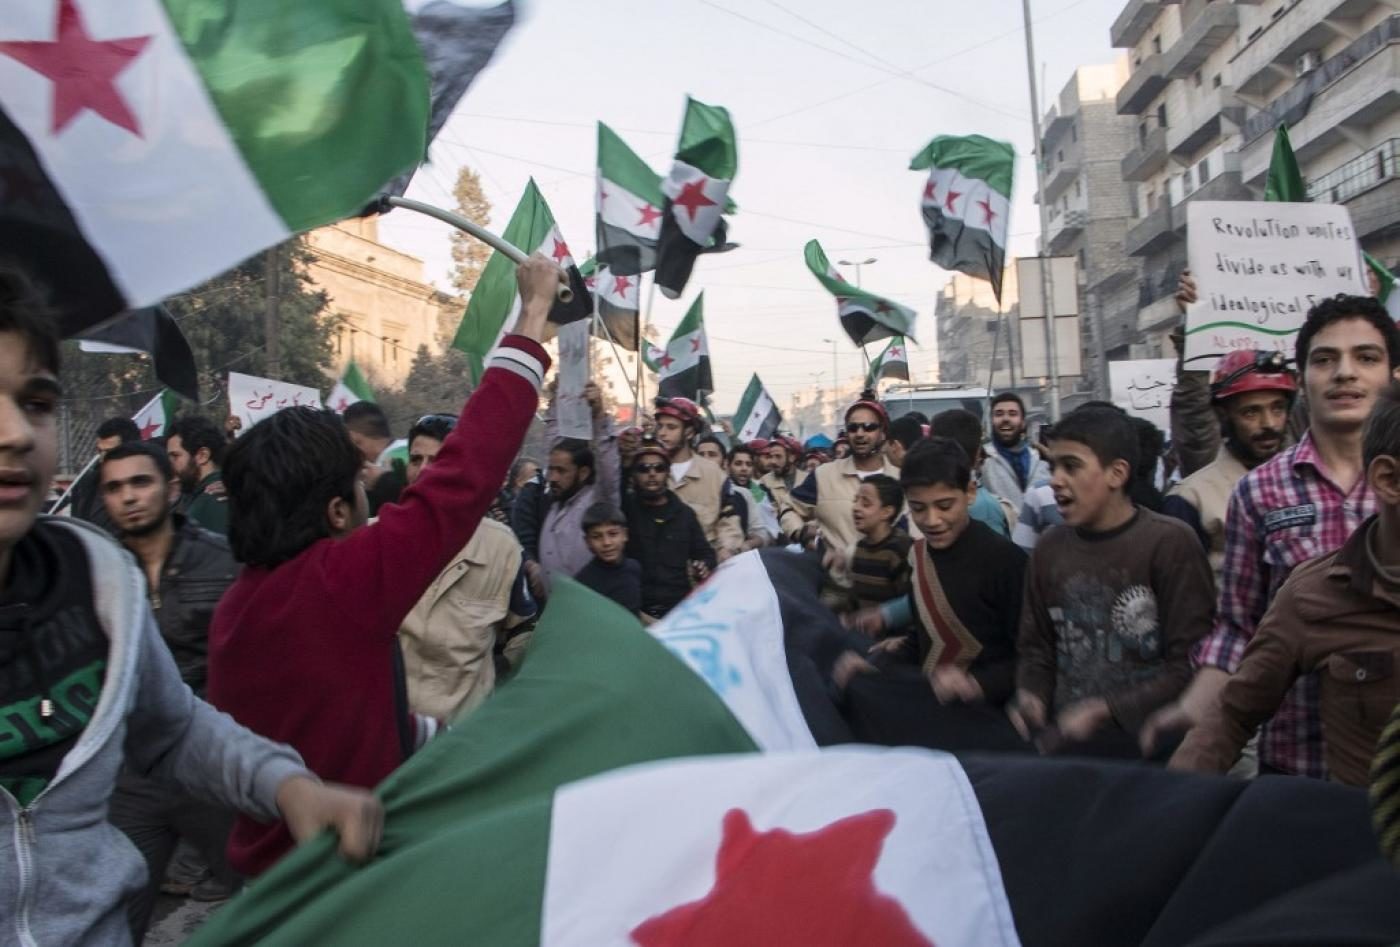 Syrians rally in support of the Free Syrian Army in eastern Aleppo in November 2014